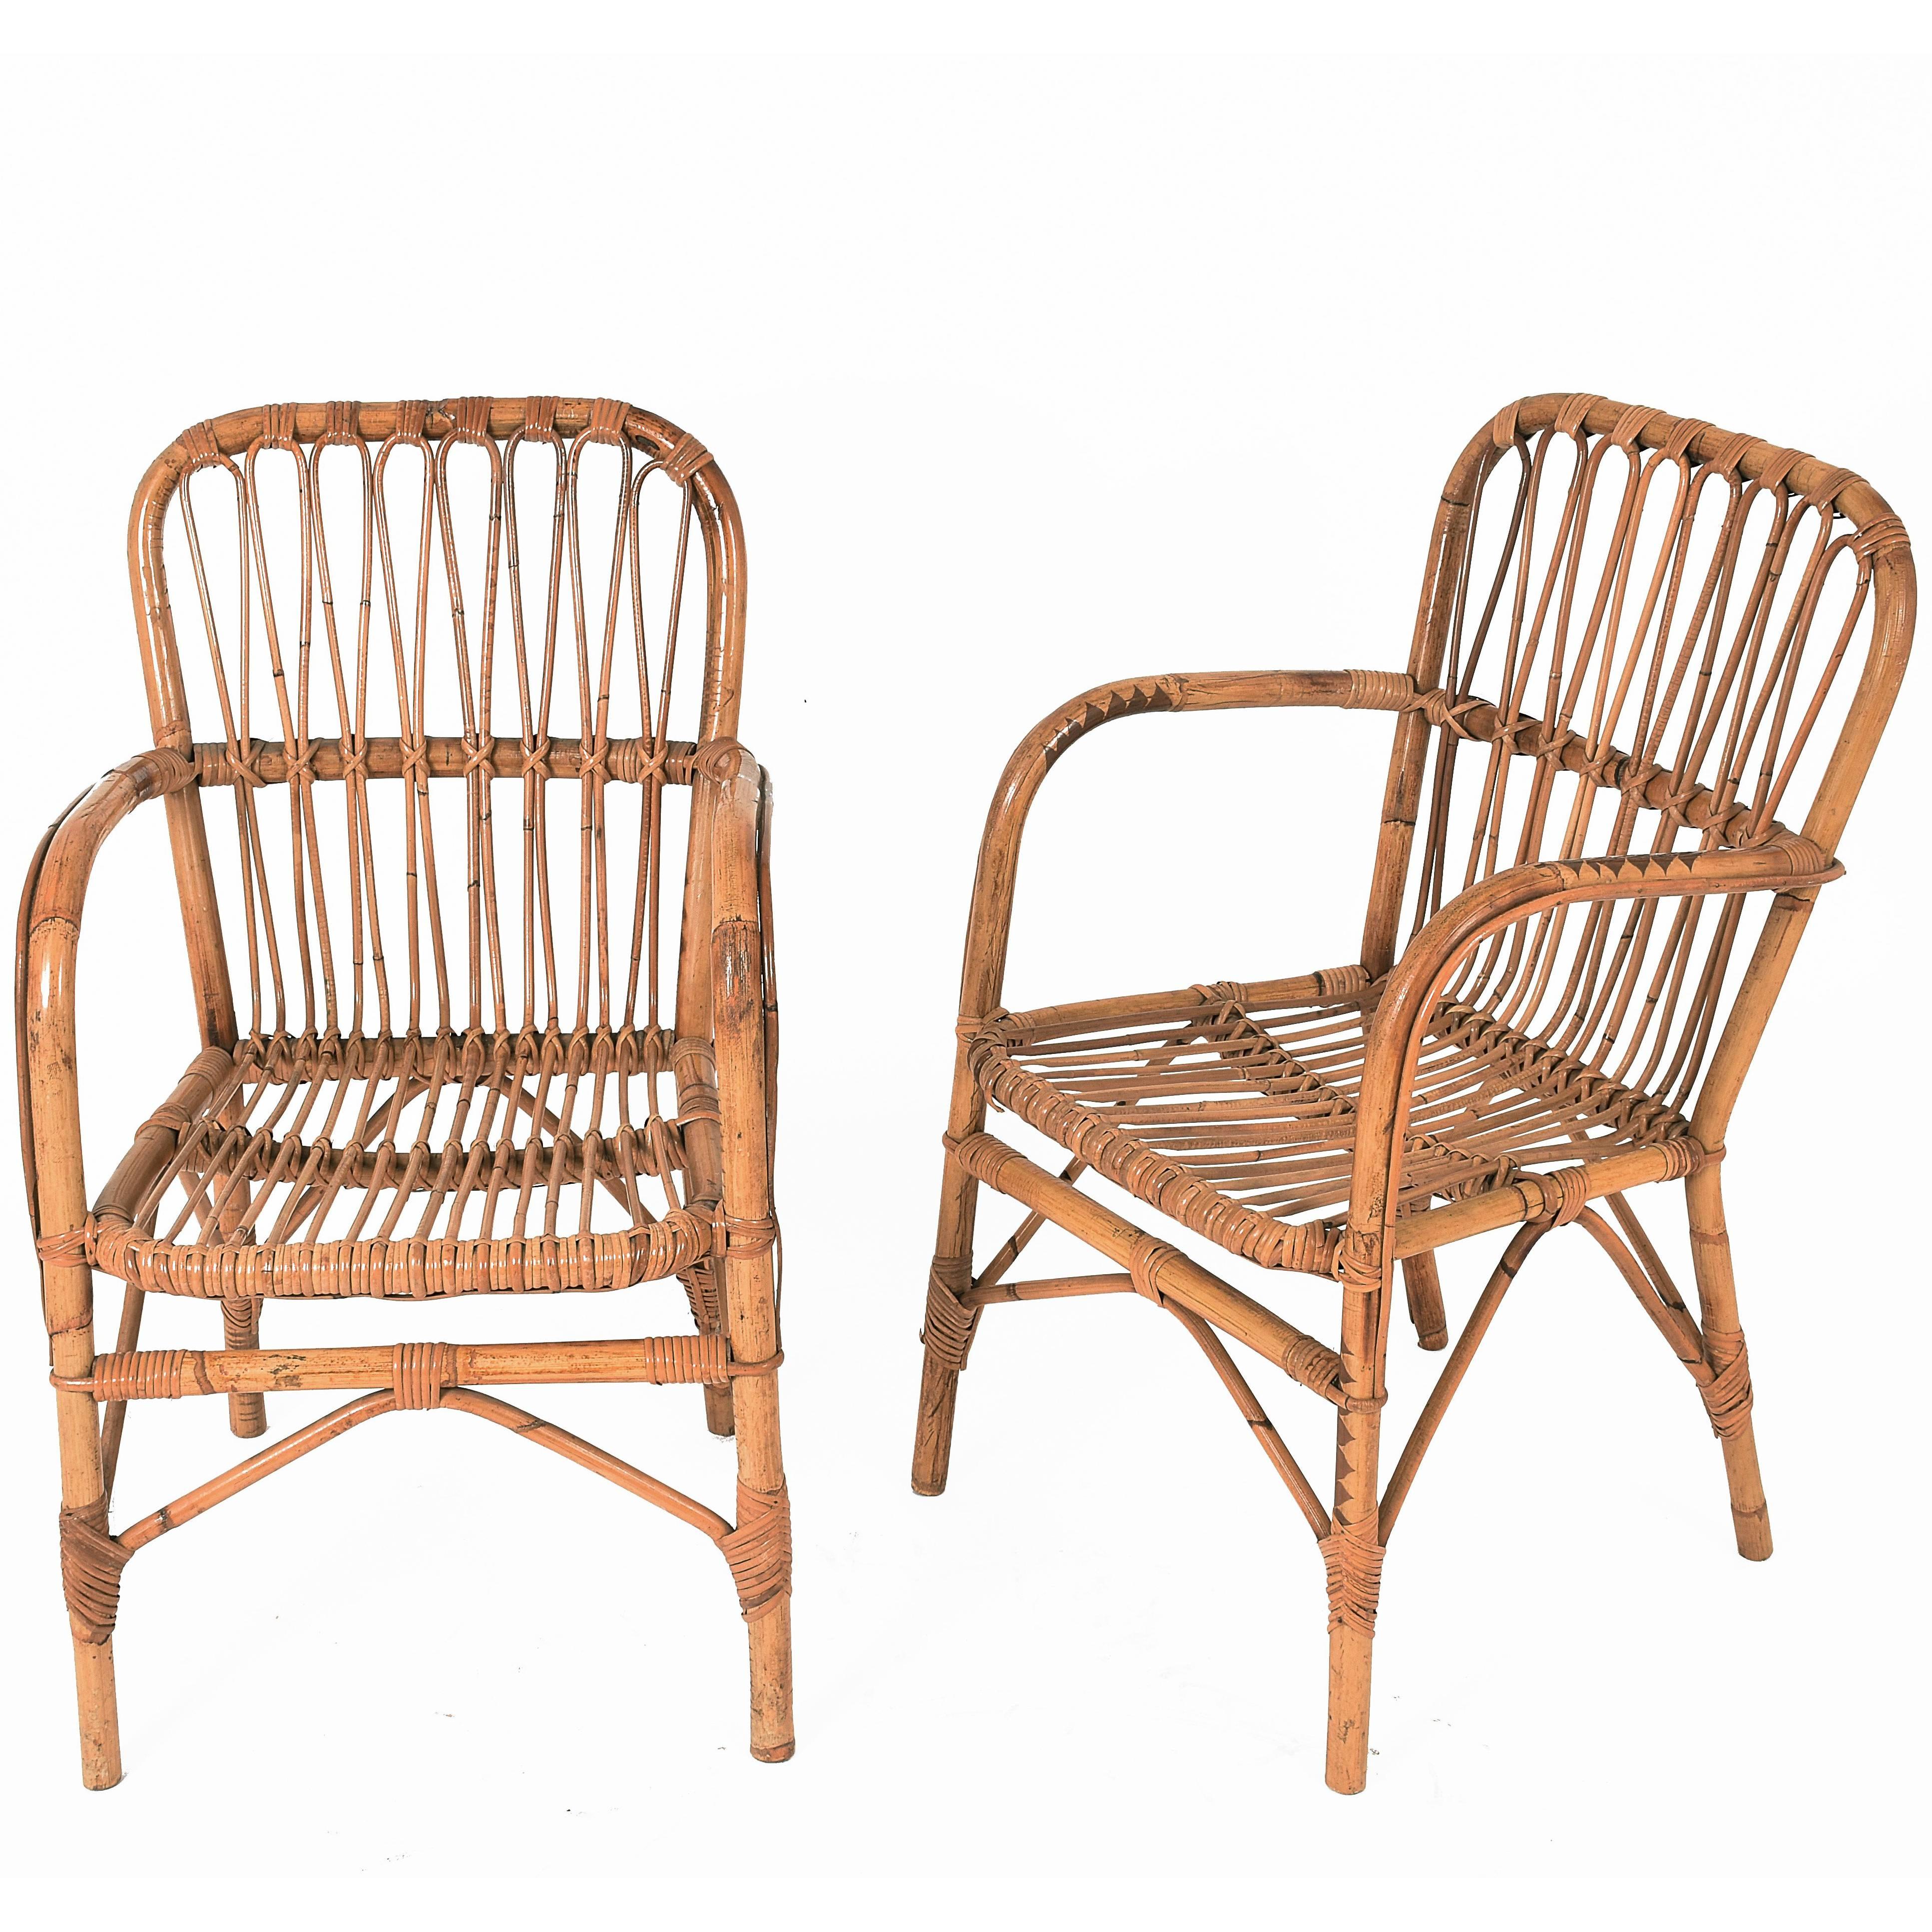 Set of Six Chairs Midcentury Franco Albini Style Armchairs, Bamboo and Wicker